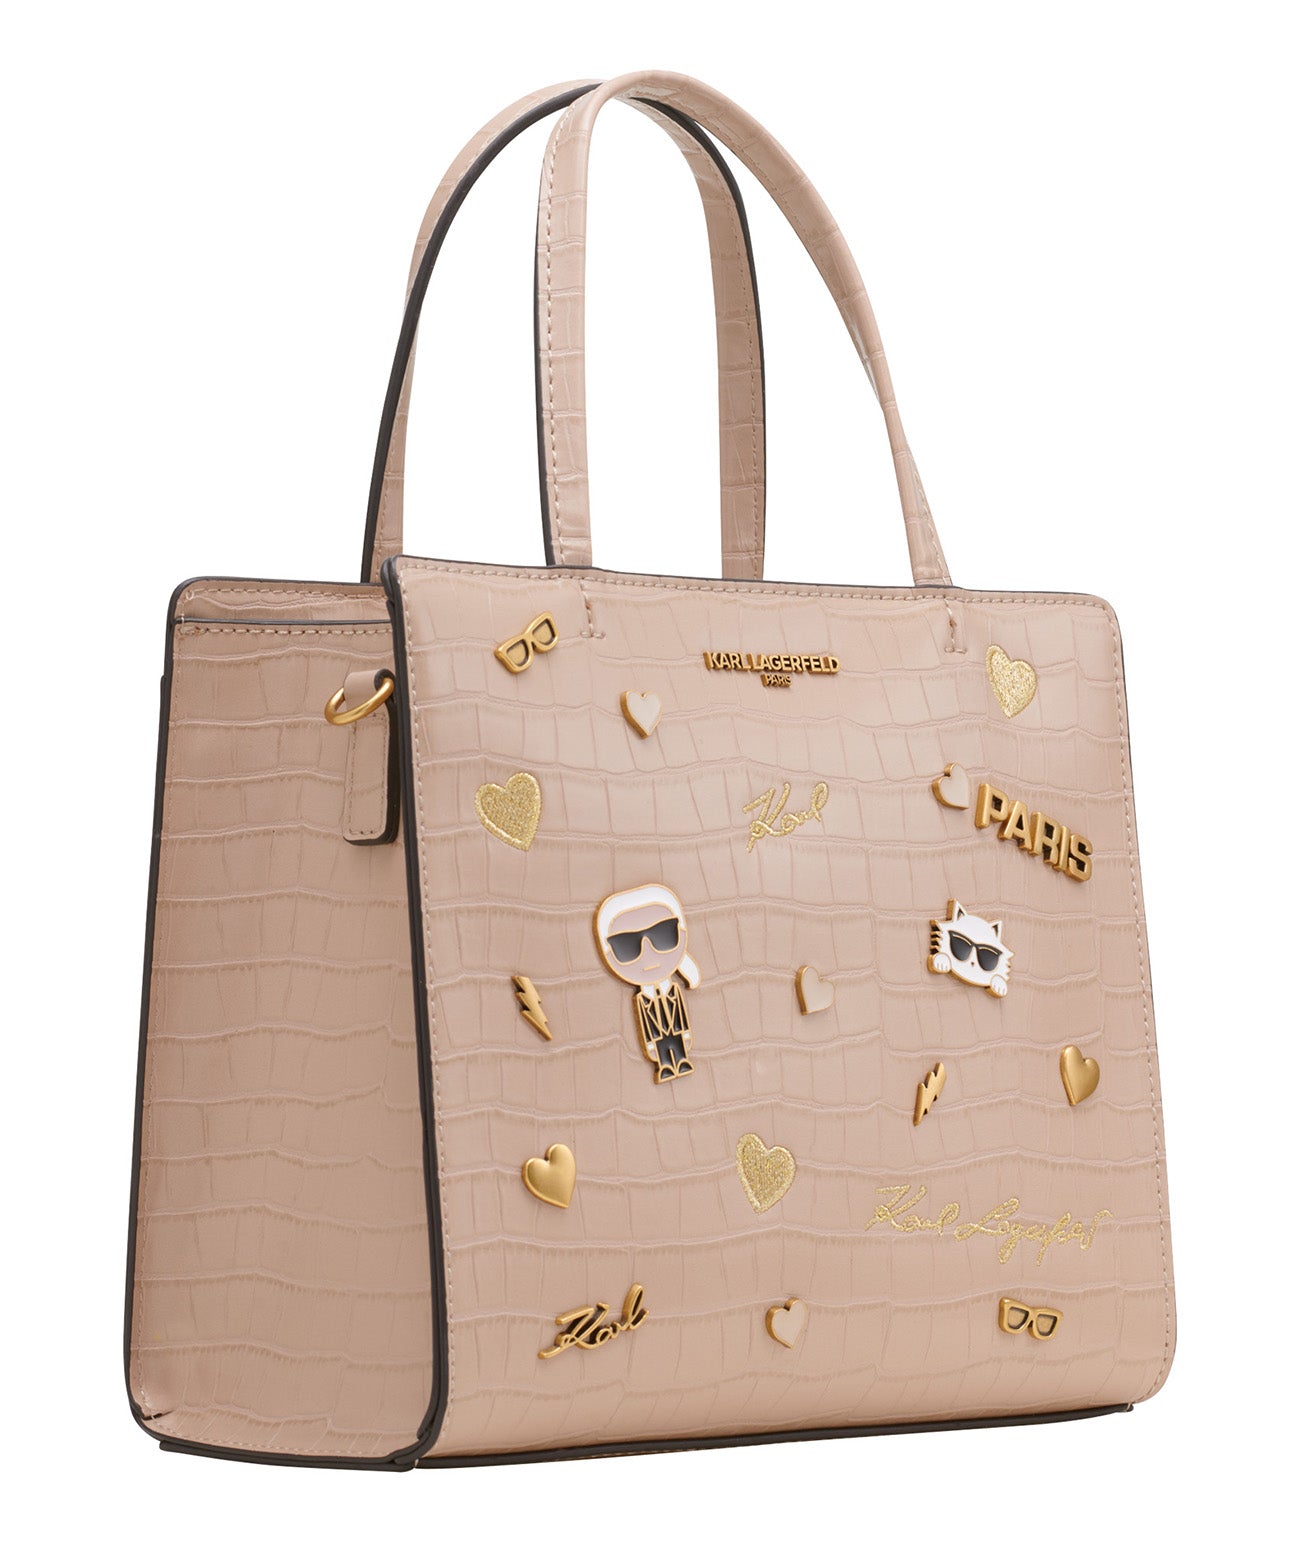 MAYBELLE PINS SATCHEL